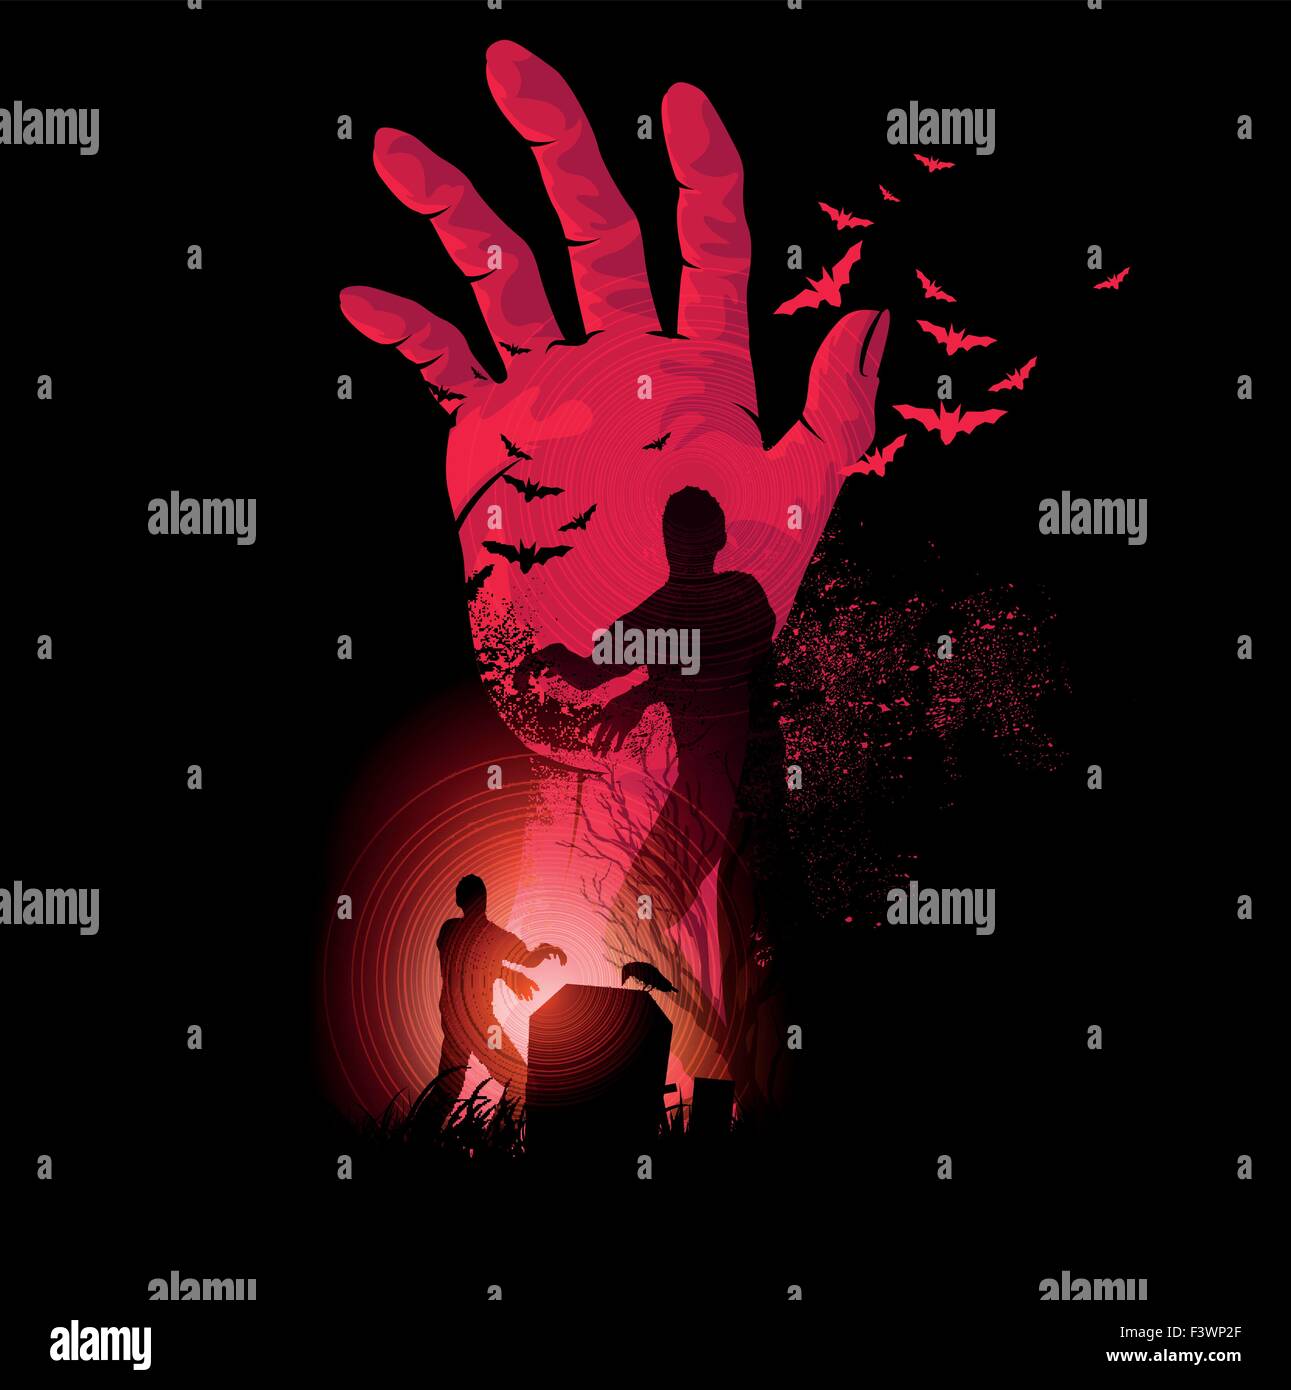 Zombie Night. A zombie hand rising up with zombies walking. Halloween Vector illustration. Stock Vector